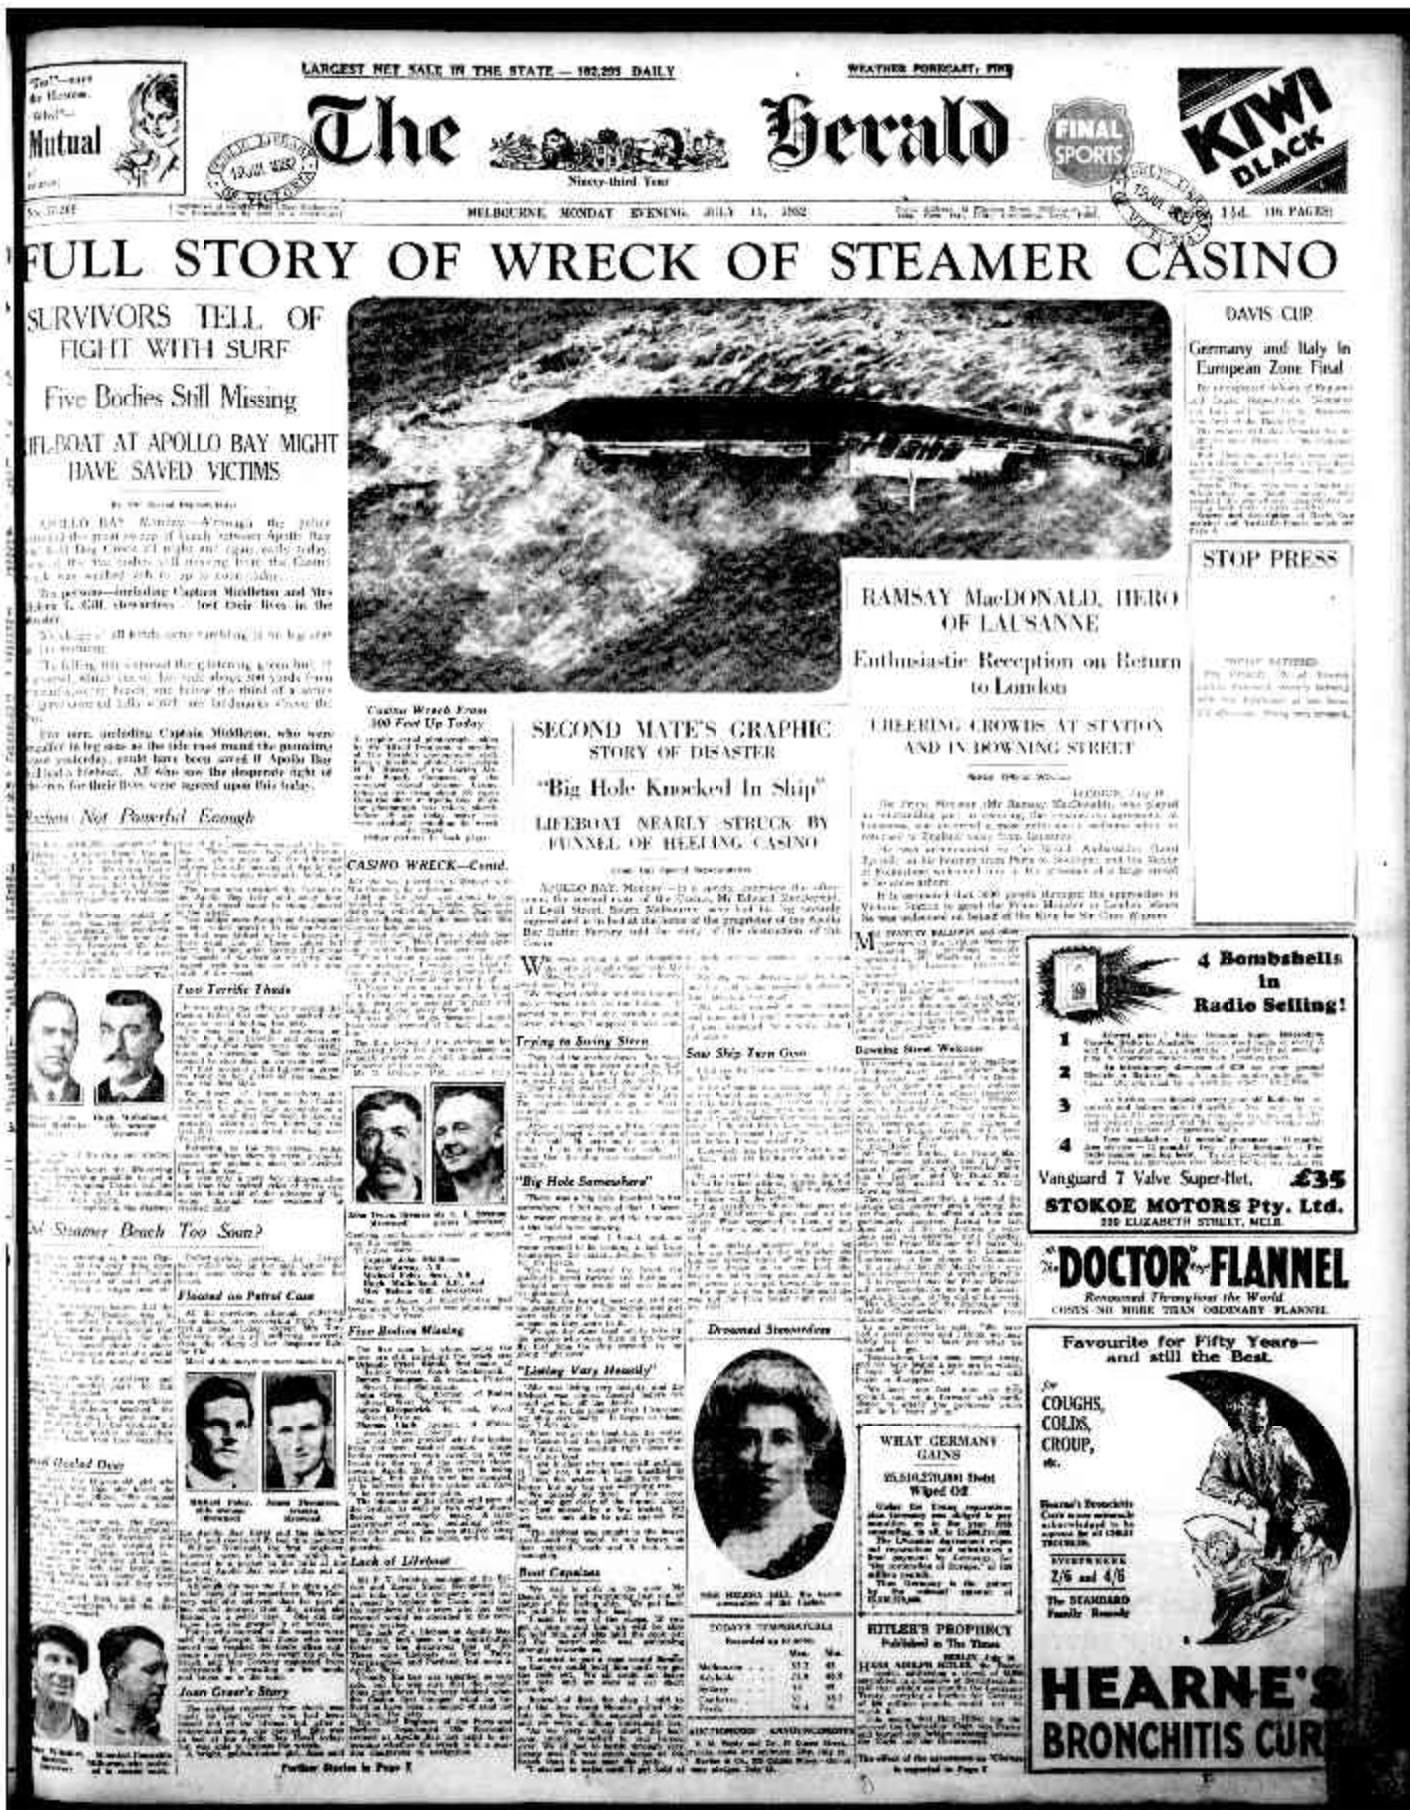 Melbourne Herald 1932 07 11 page 1